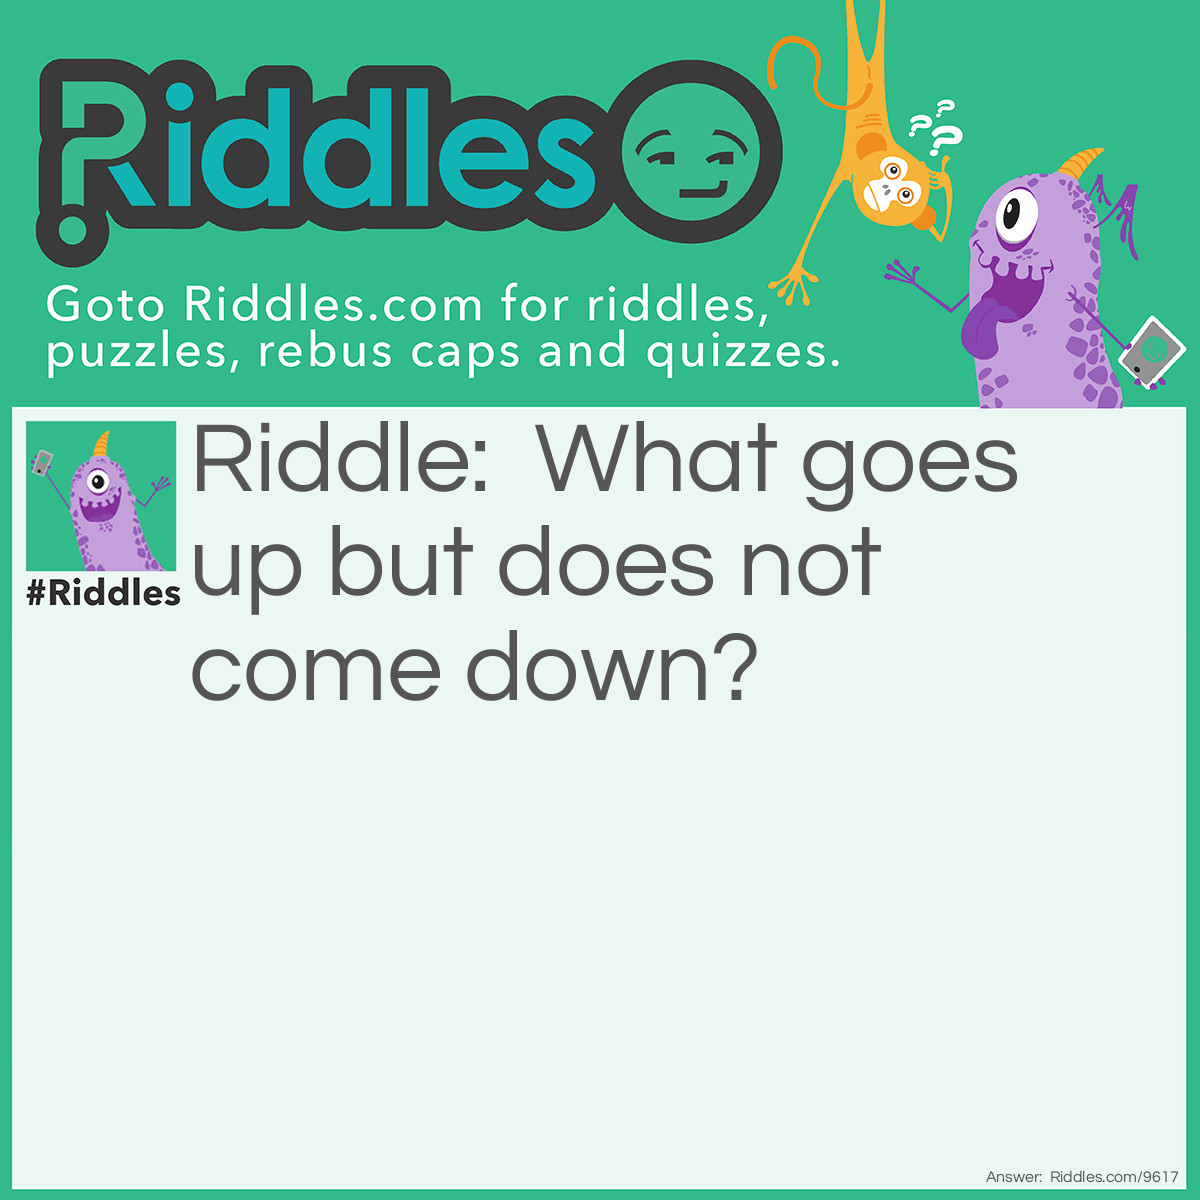 Riddle: What goes up but does not come down? Answer: Air.